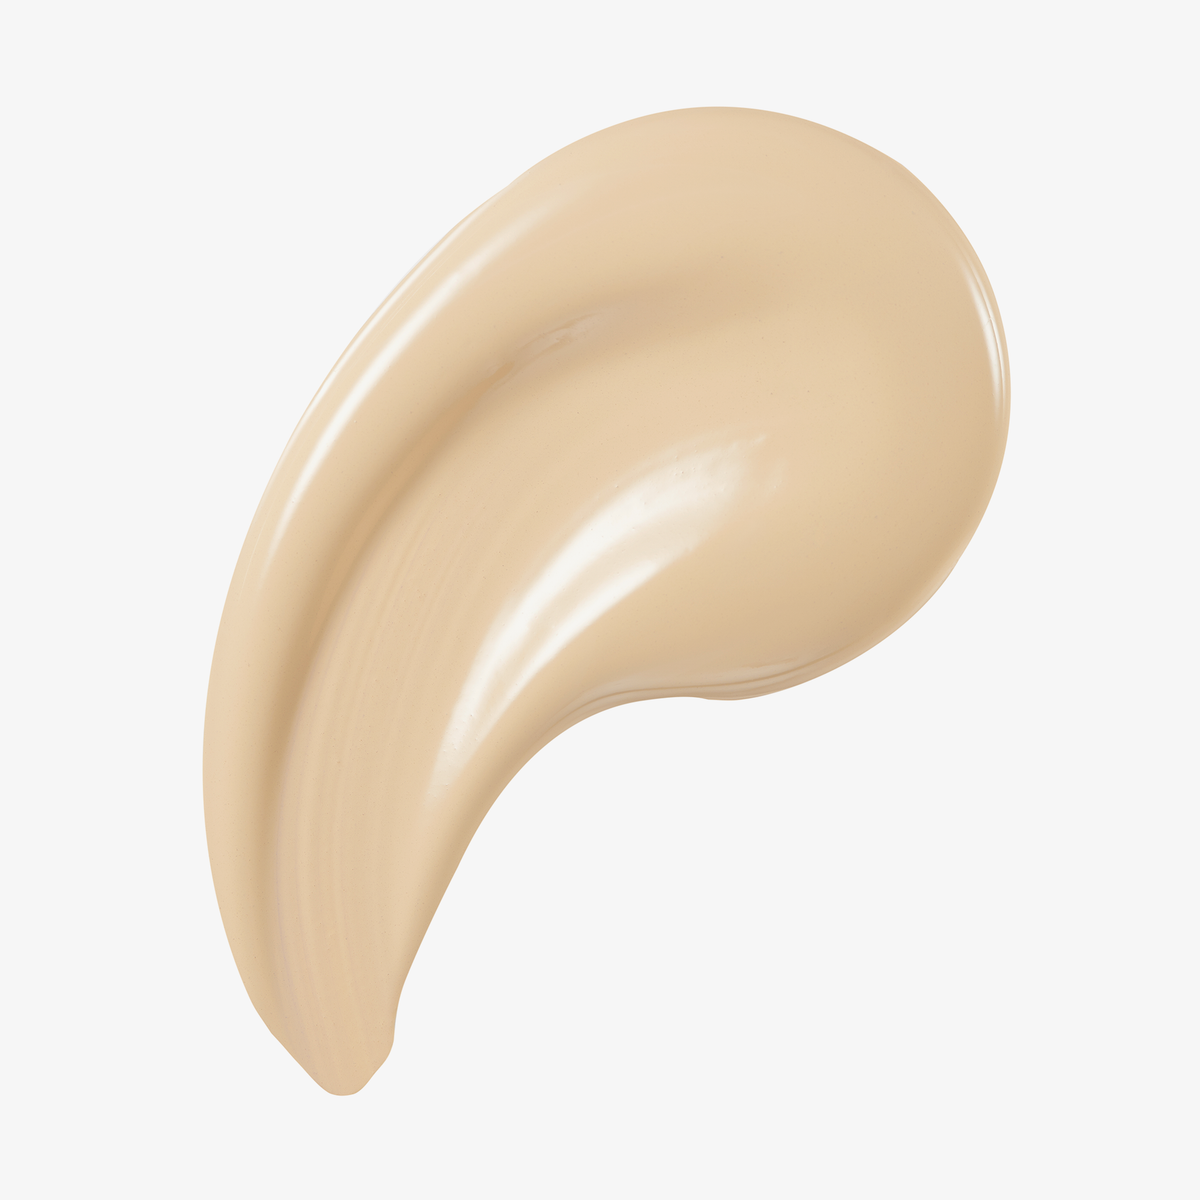 Revolution Beauty | Conceal & Define Foundation F0.2